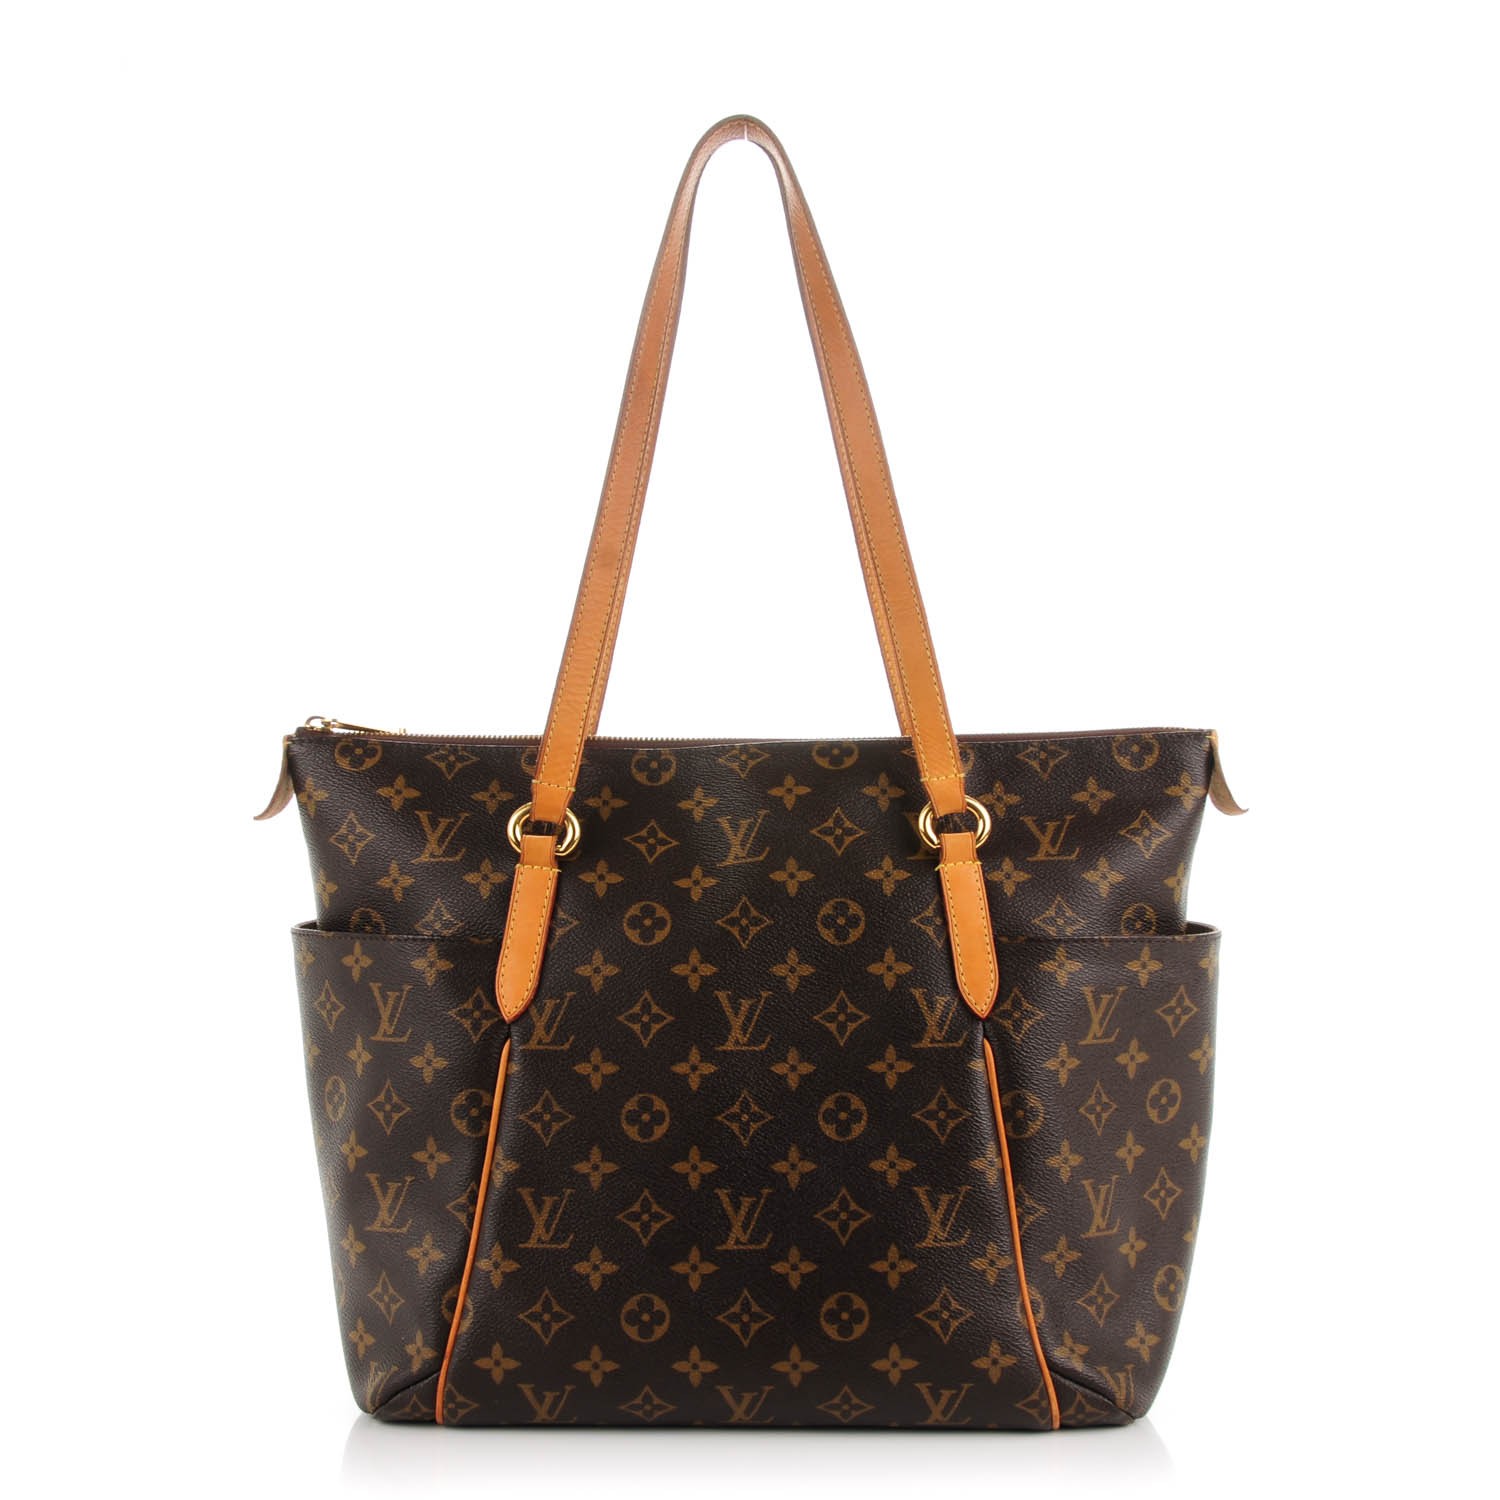 LOUIS VUITTON】ルイヴィトン『ダミエ トータリーMM』N41281 ...